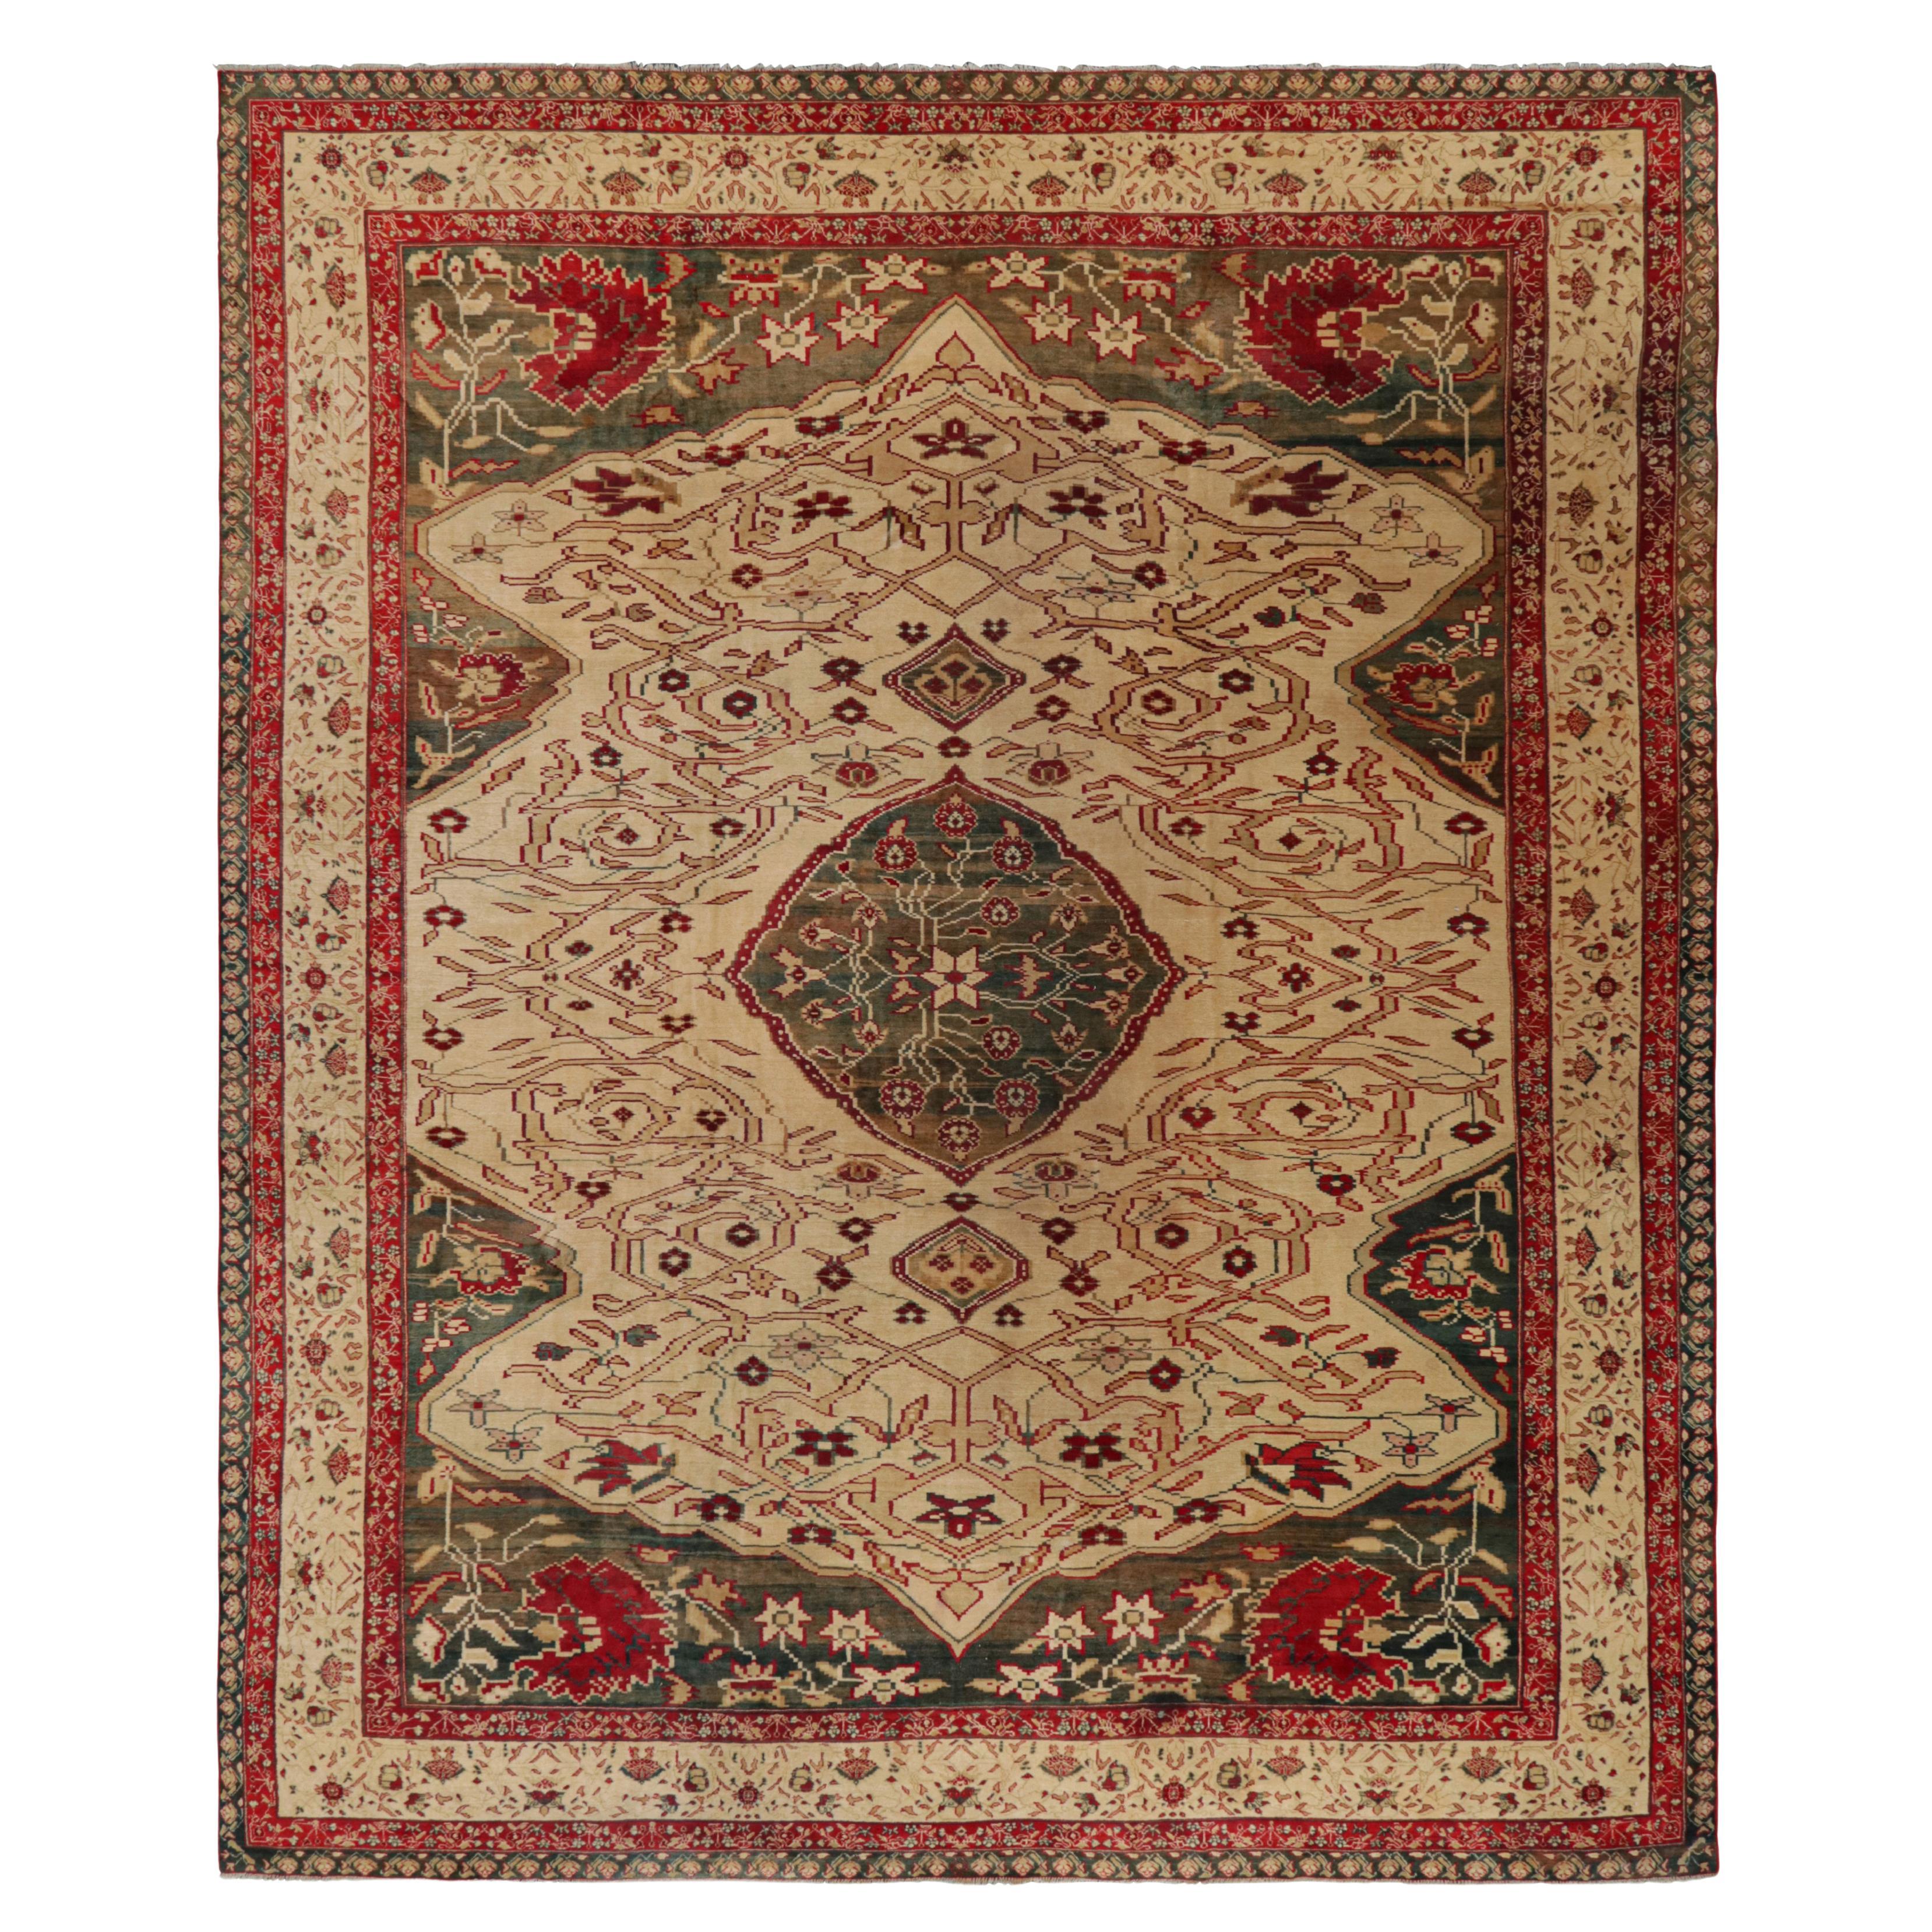 Oversized Antique Agra Jail Rug with Medallion and Florals, from Rug & Kilim